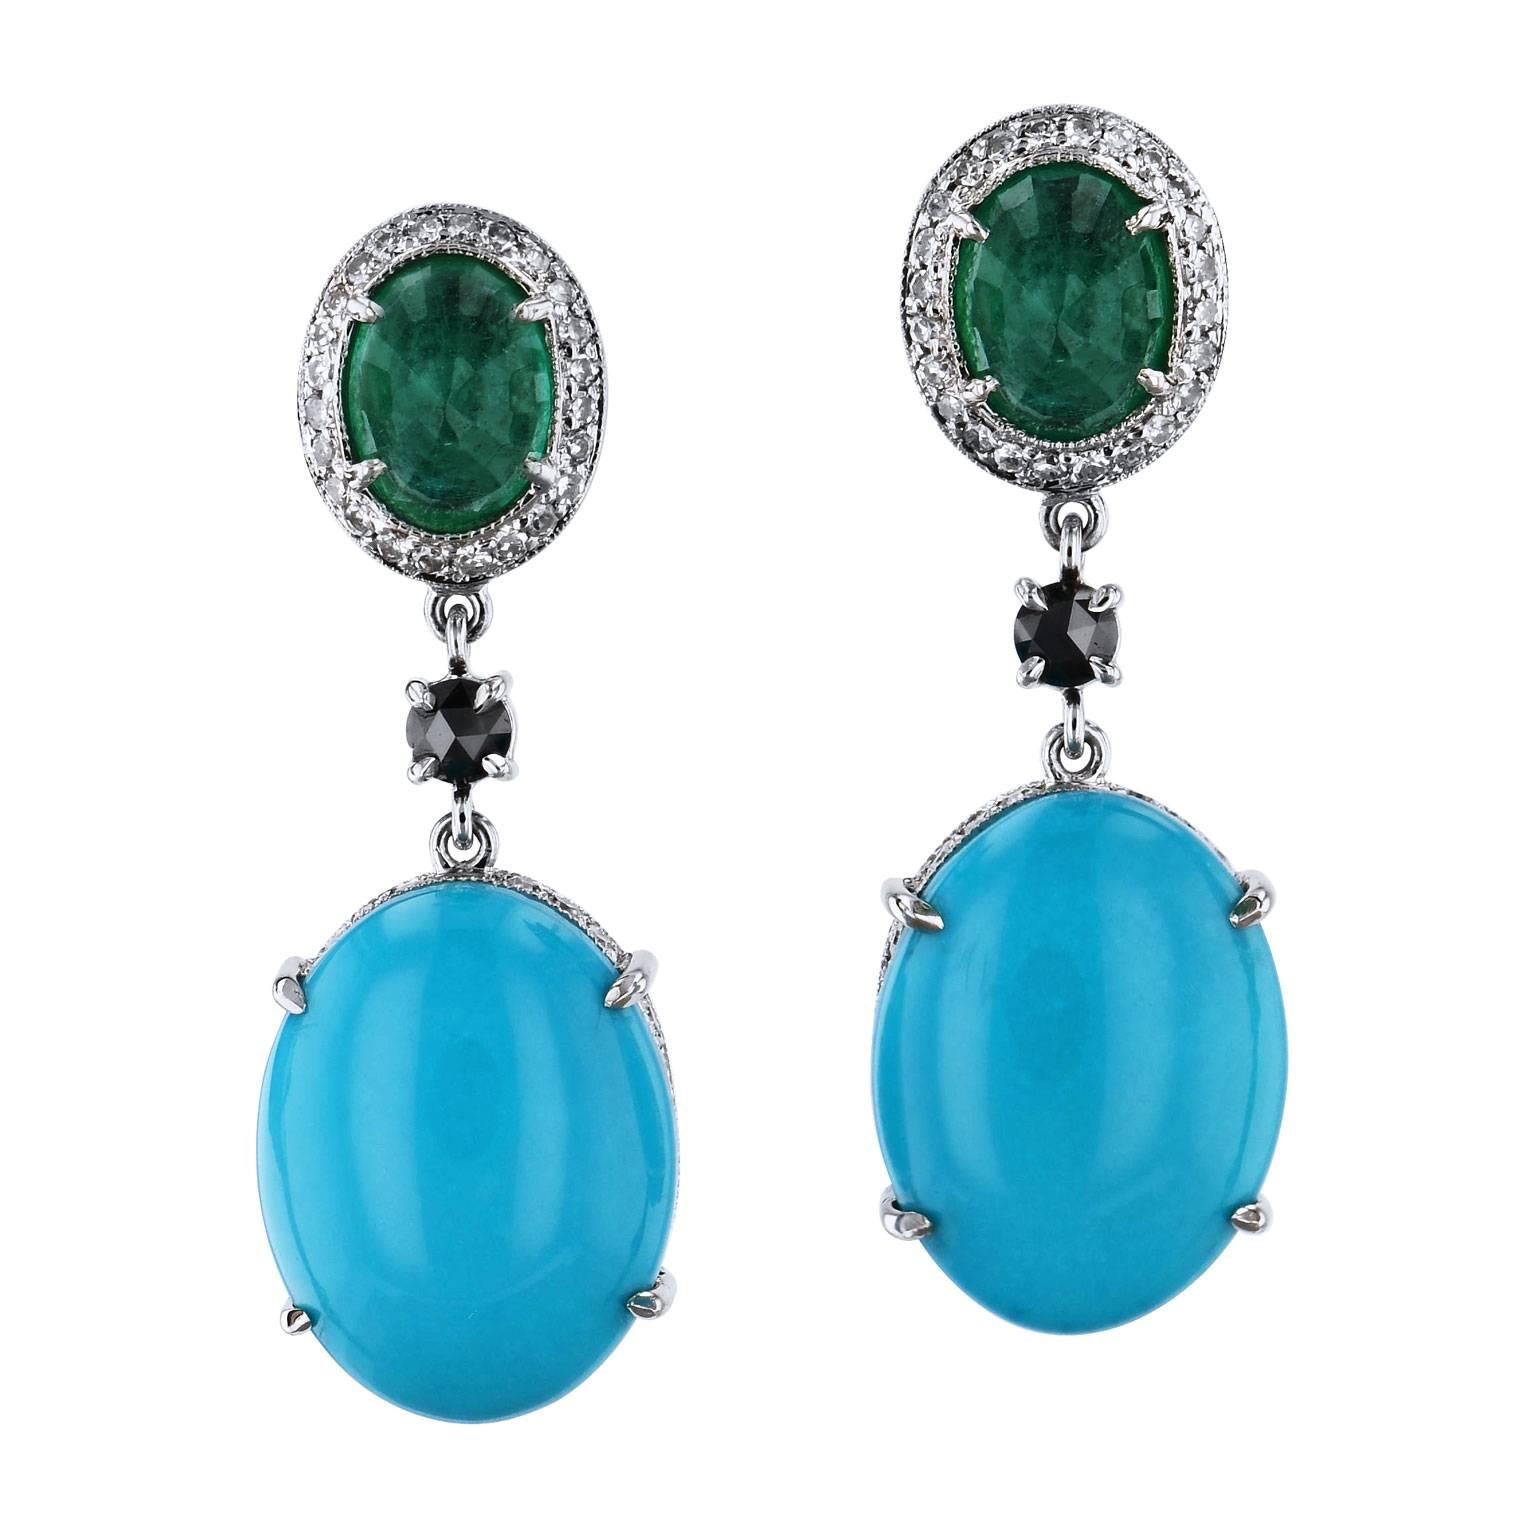 H & H 12.72 Carat Turquoise and 2.32 Carat Emerald Dangle Earrings